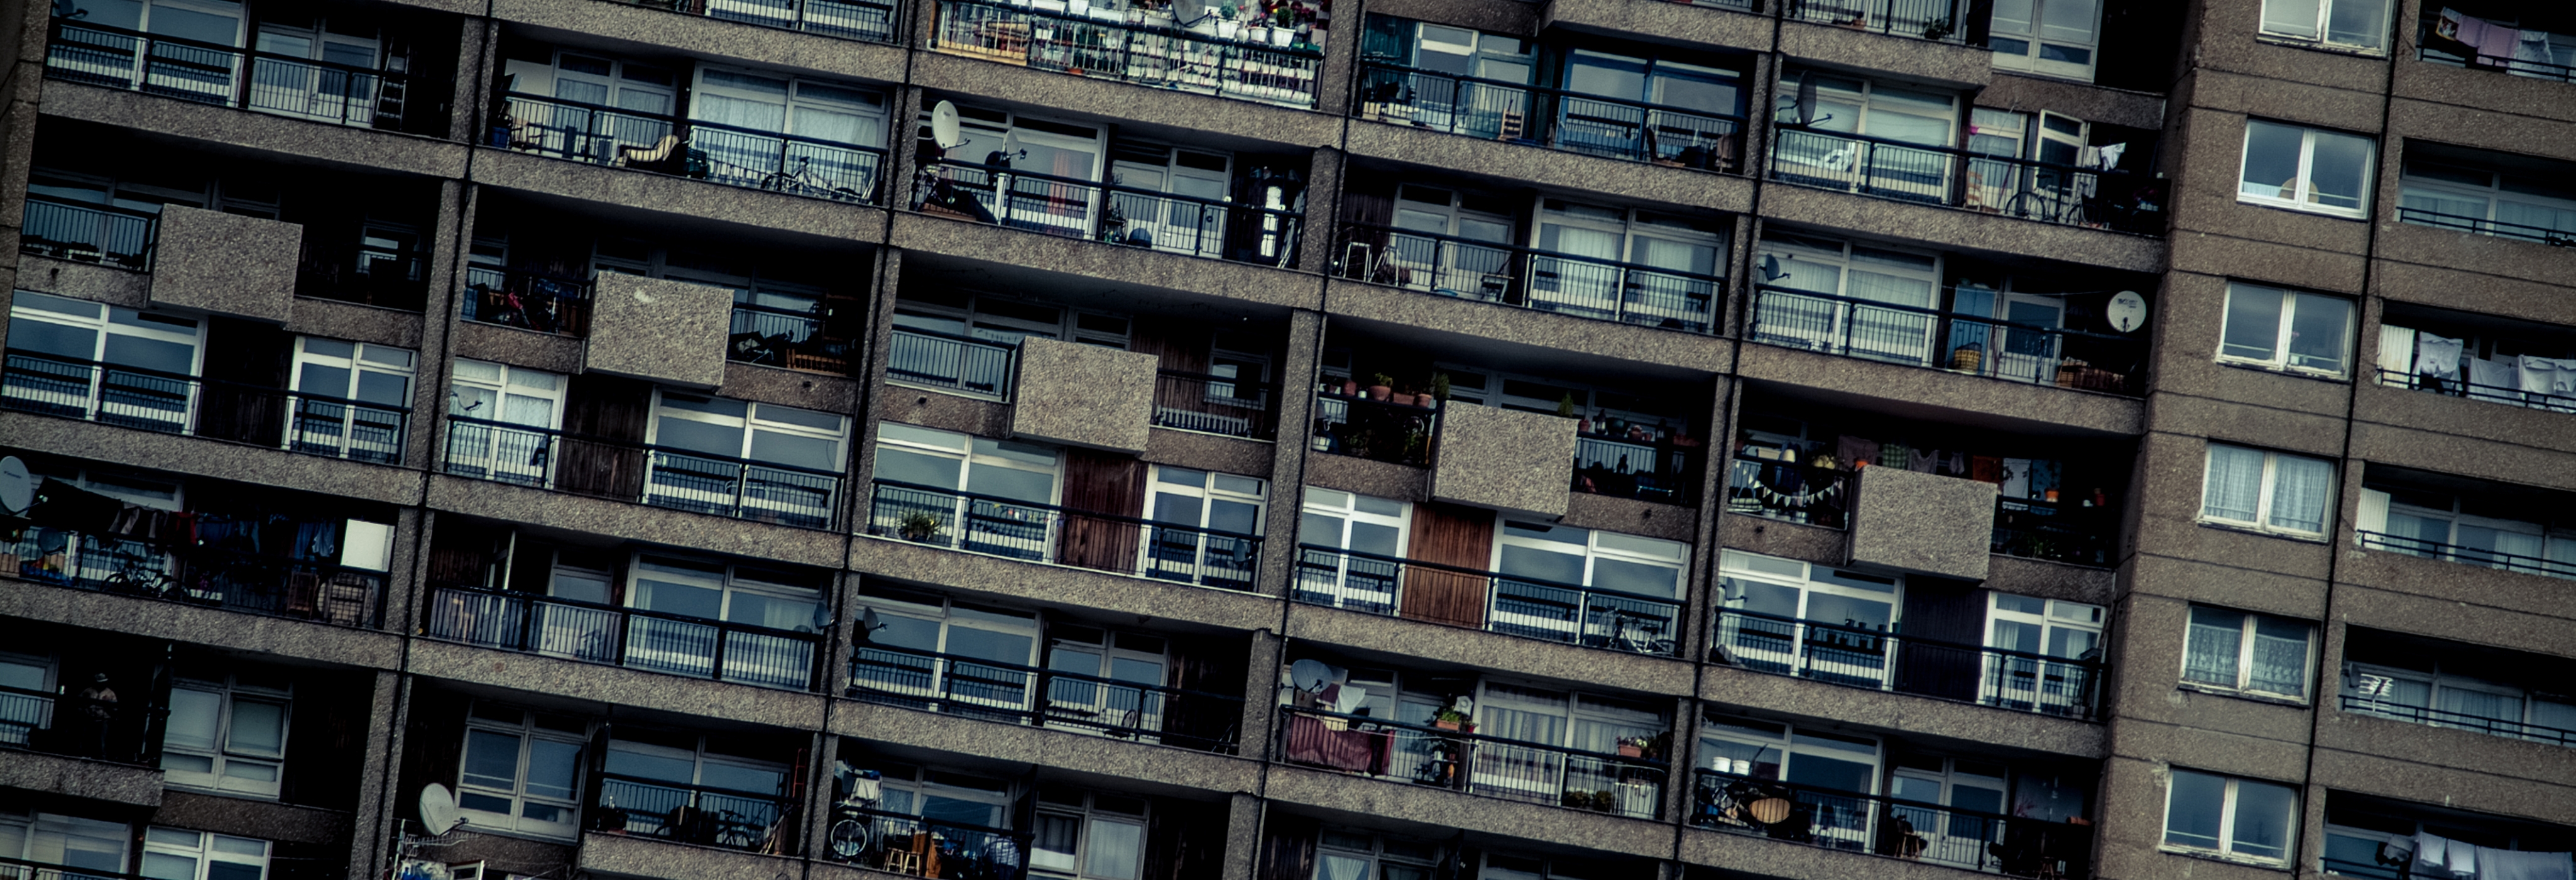 densely populated flats with balconies